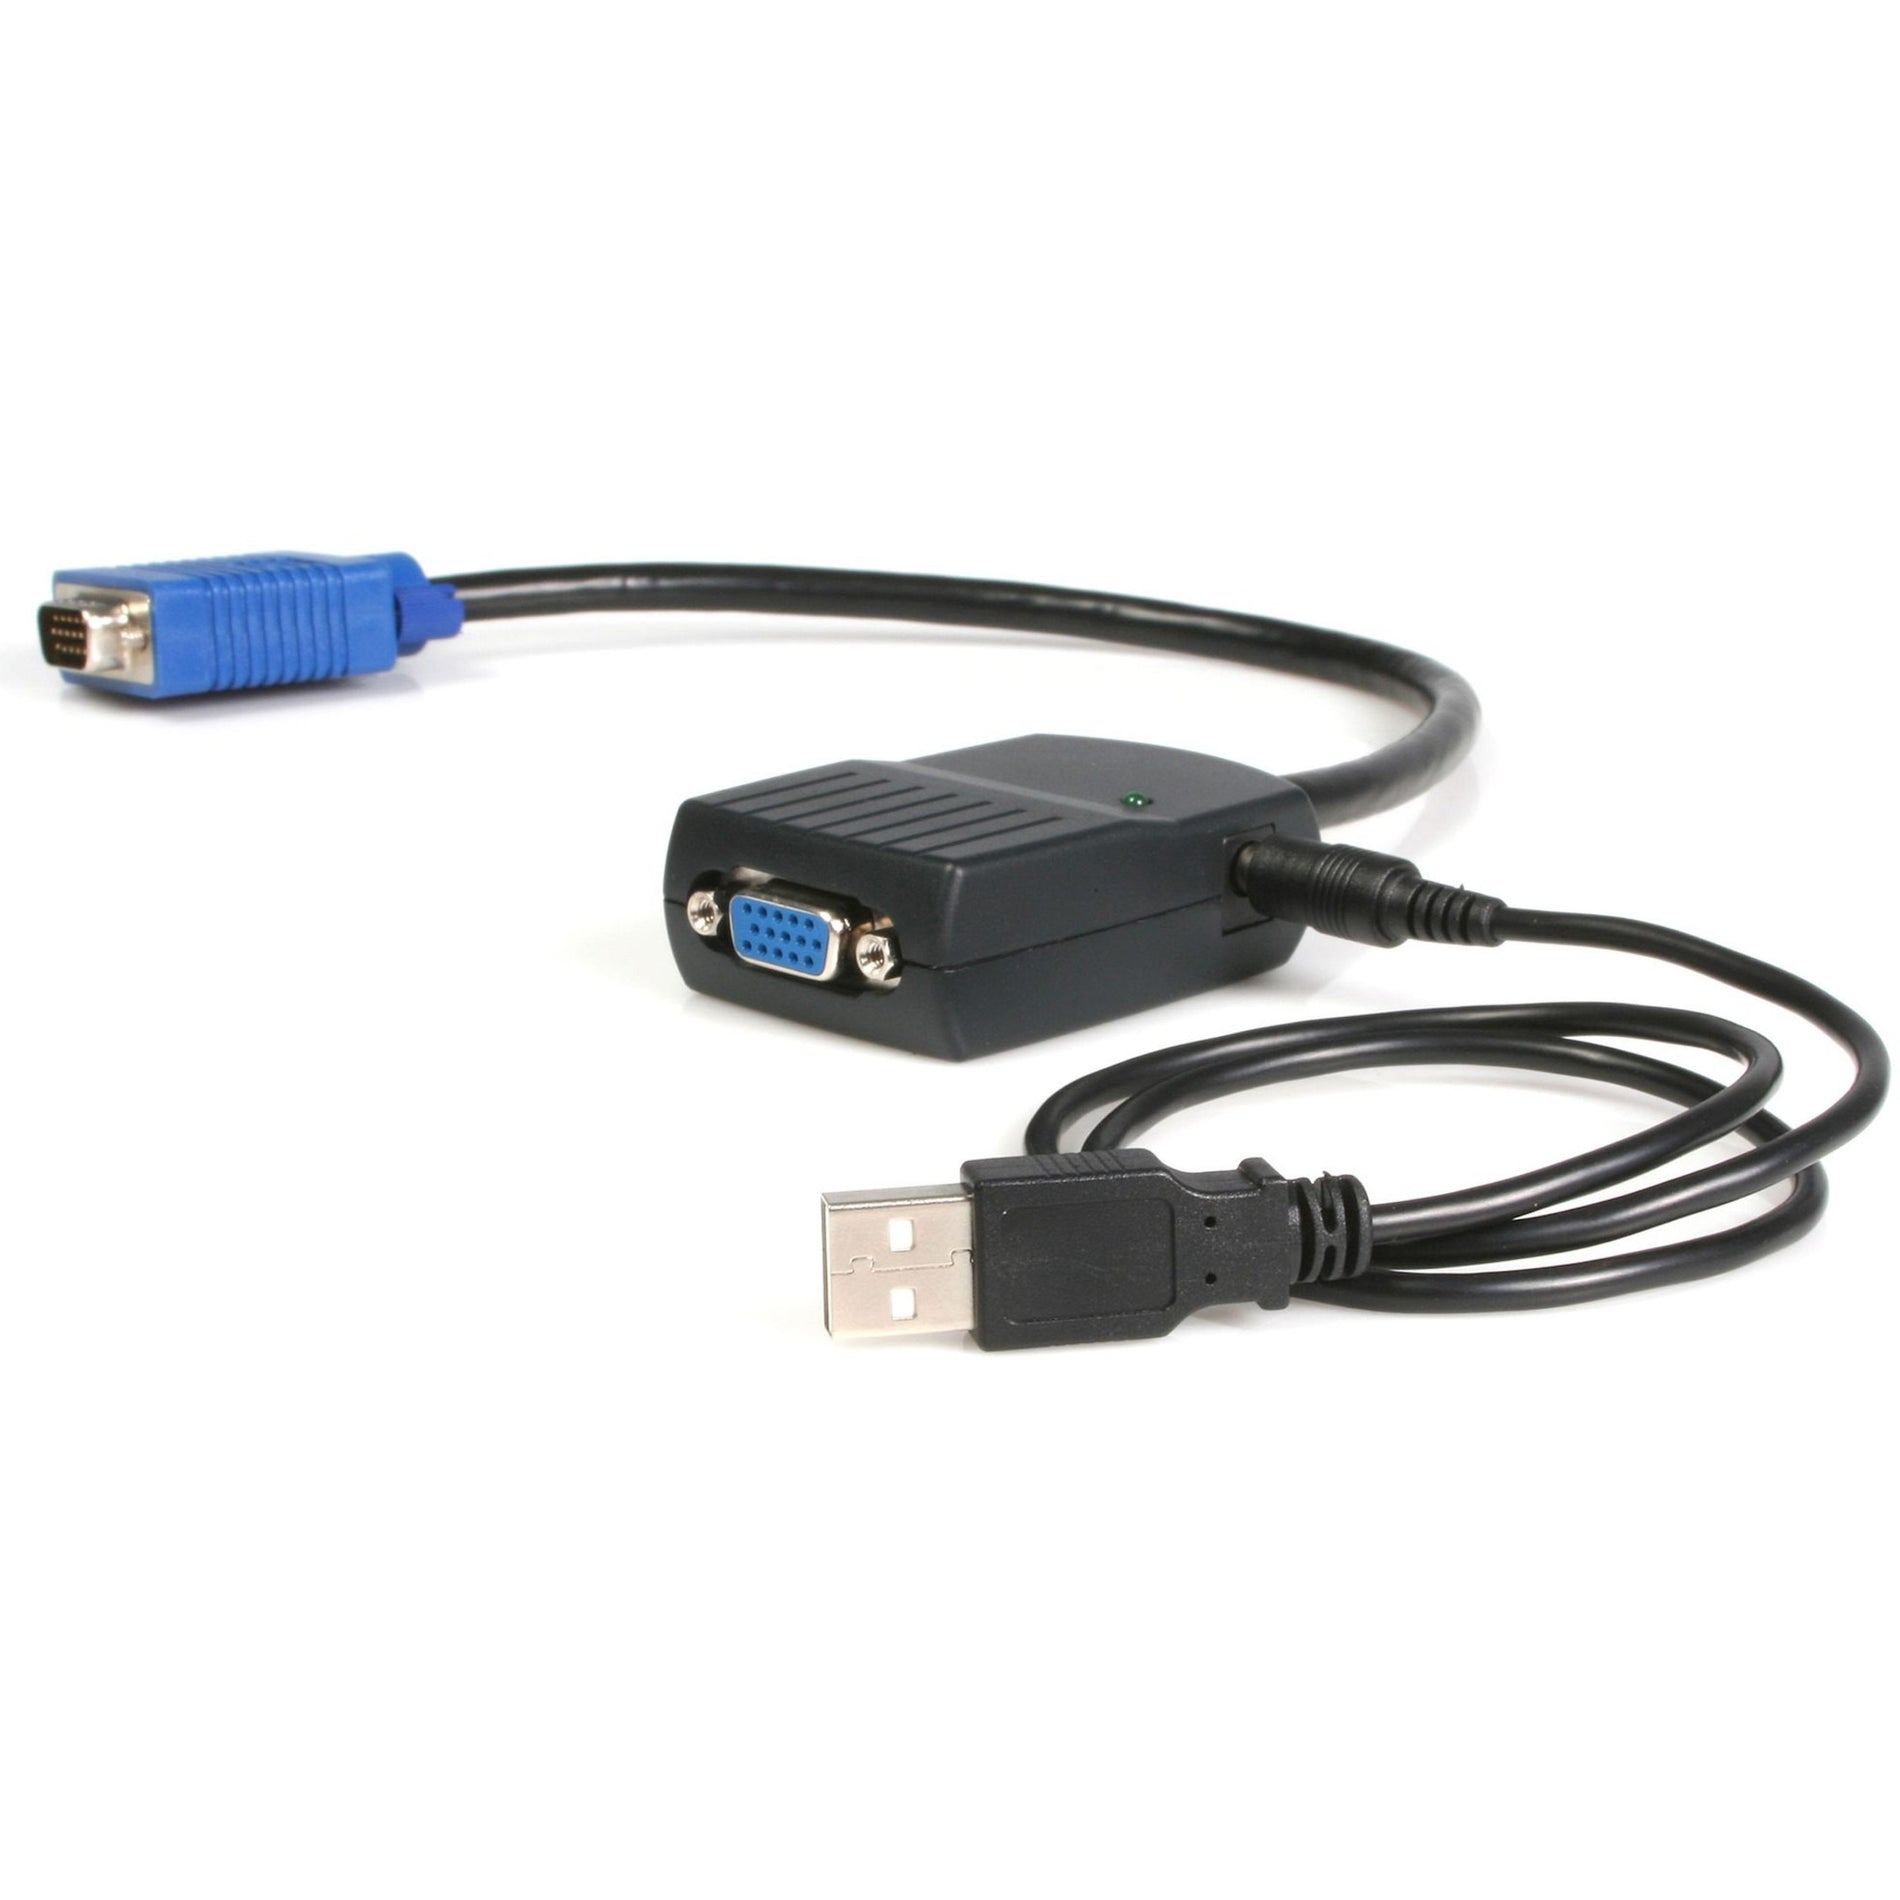 StarTech.com ST122LE 2 Port VGA Video Splitter - USB Powered, Boost Your Display Range up to 210 Feet